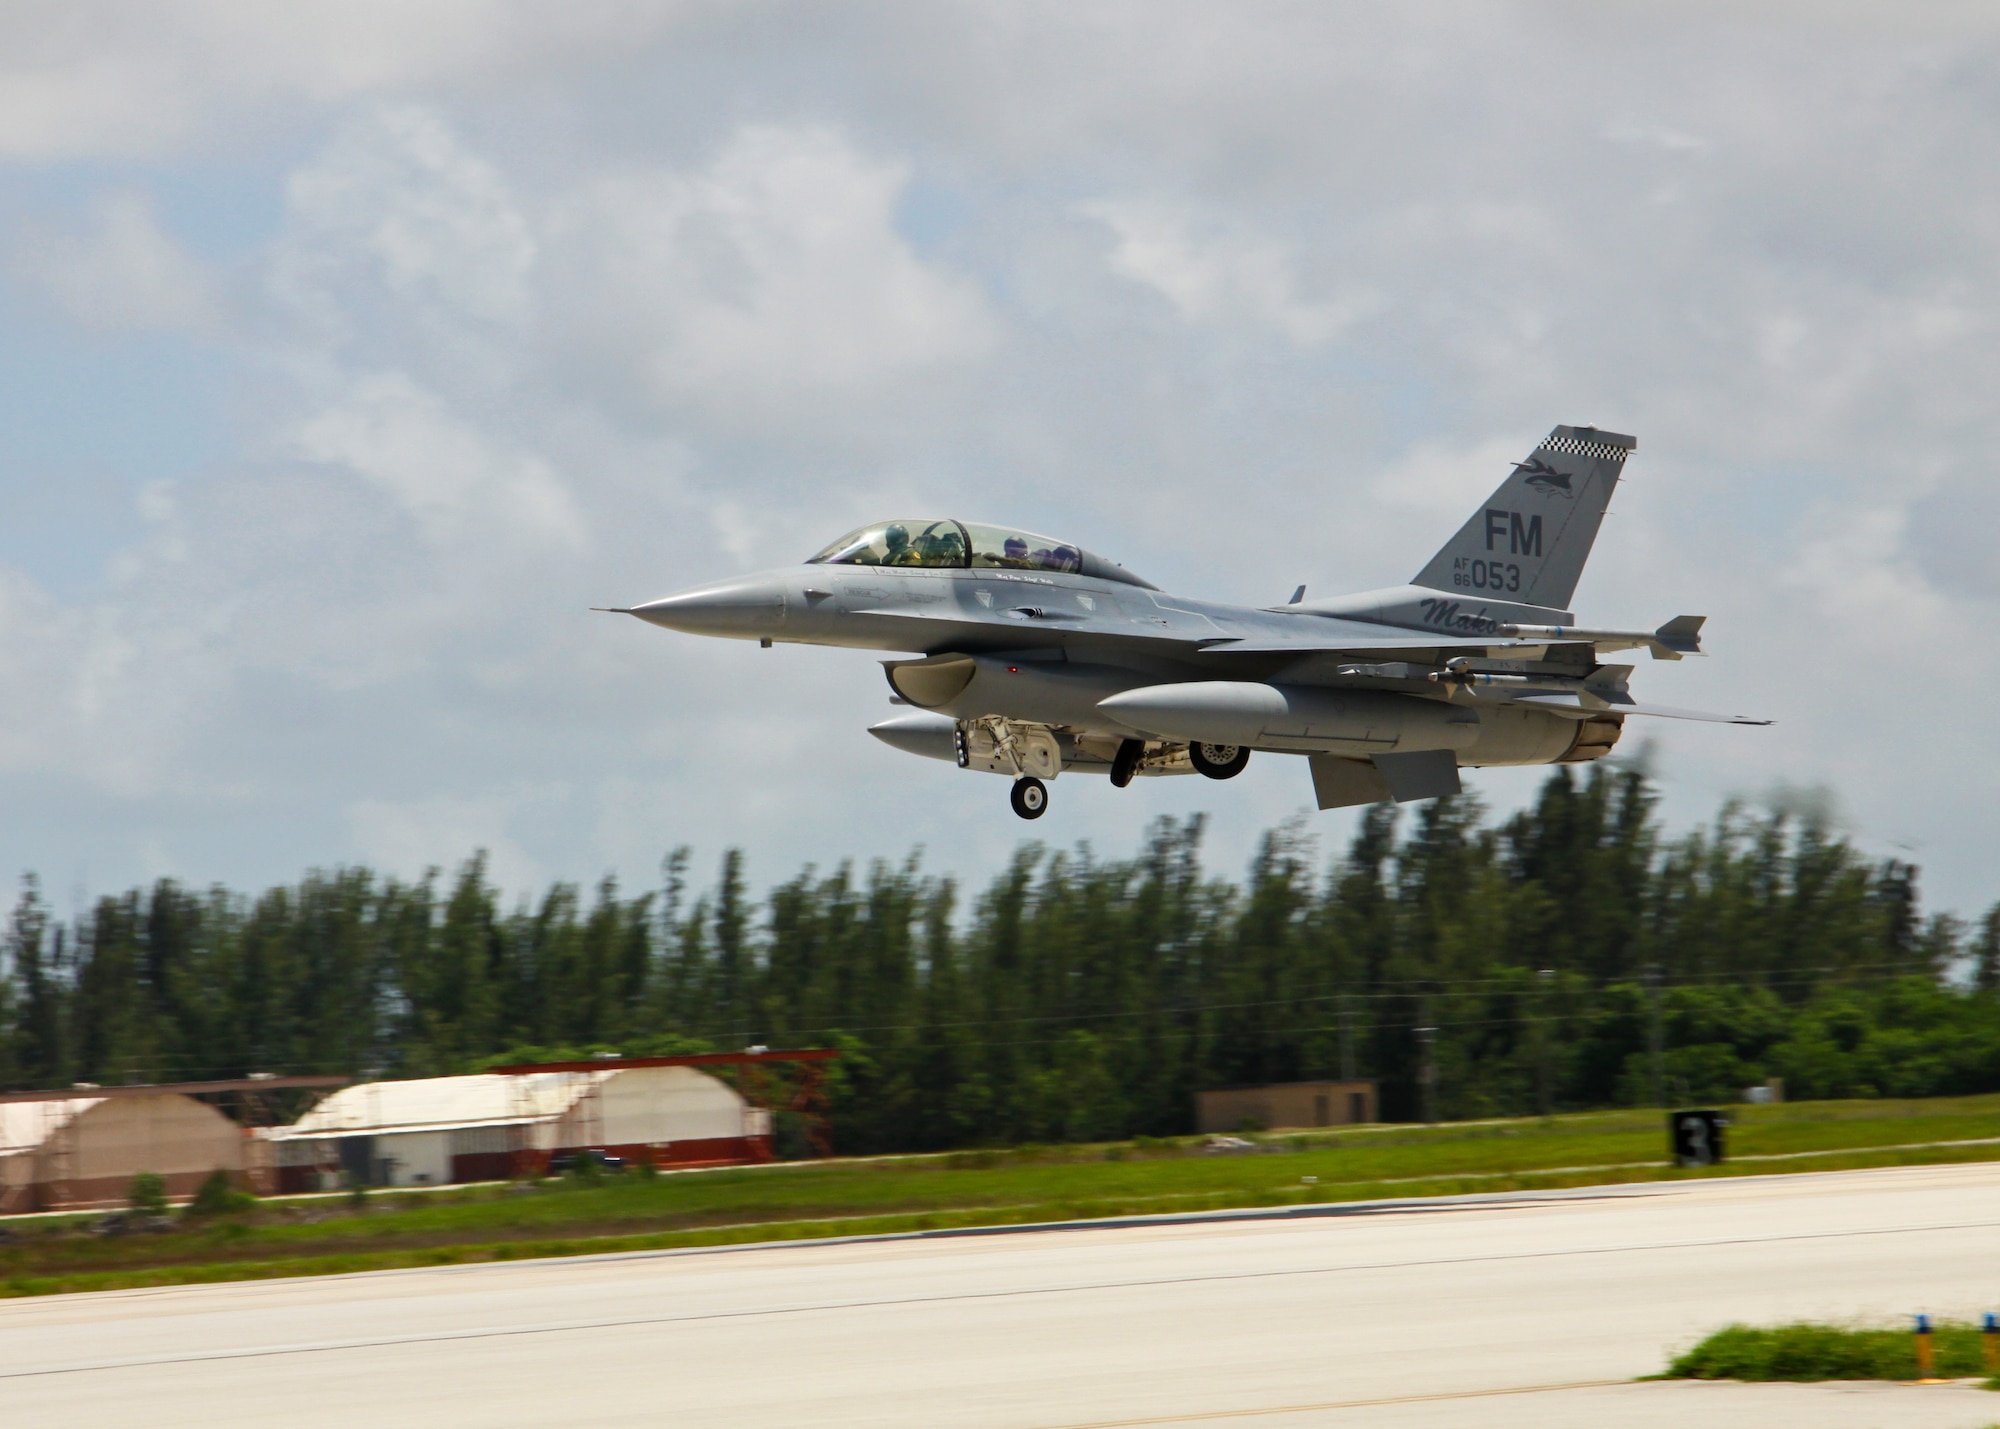 An F-16D of the 93rd Fighter Squadron, 482nd Fighter Wing, takes to the air carrying Col. Jose Monteagudo, 482nd FW Vice Commander, and Uruguayan Air Force Capt. Patrick Jaimez, 2nd Air Brigade. Capt. Jaimez flew with the "Makos" as part of a subject matter expert exchange flight, July 26, 2010, at Homestead Air Reserve Base, Fla. (U.S. Air Force photo/Ian Carrier)